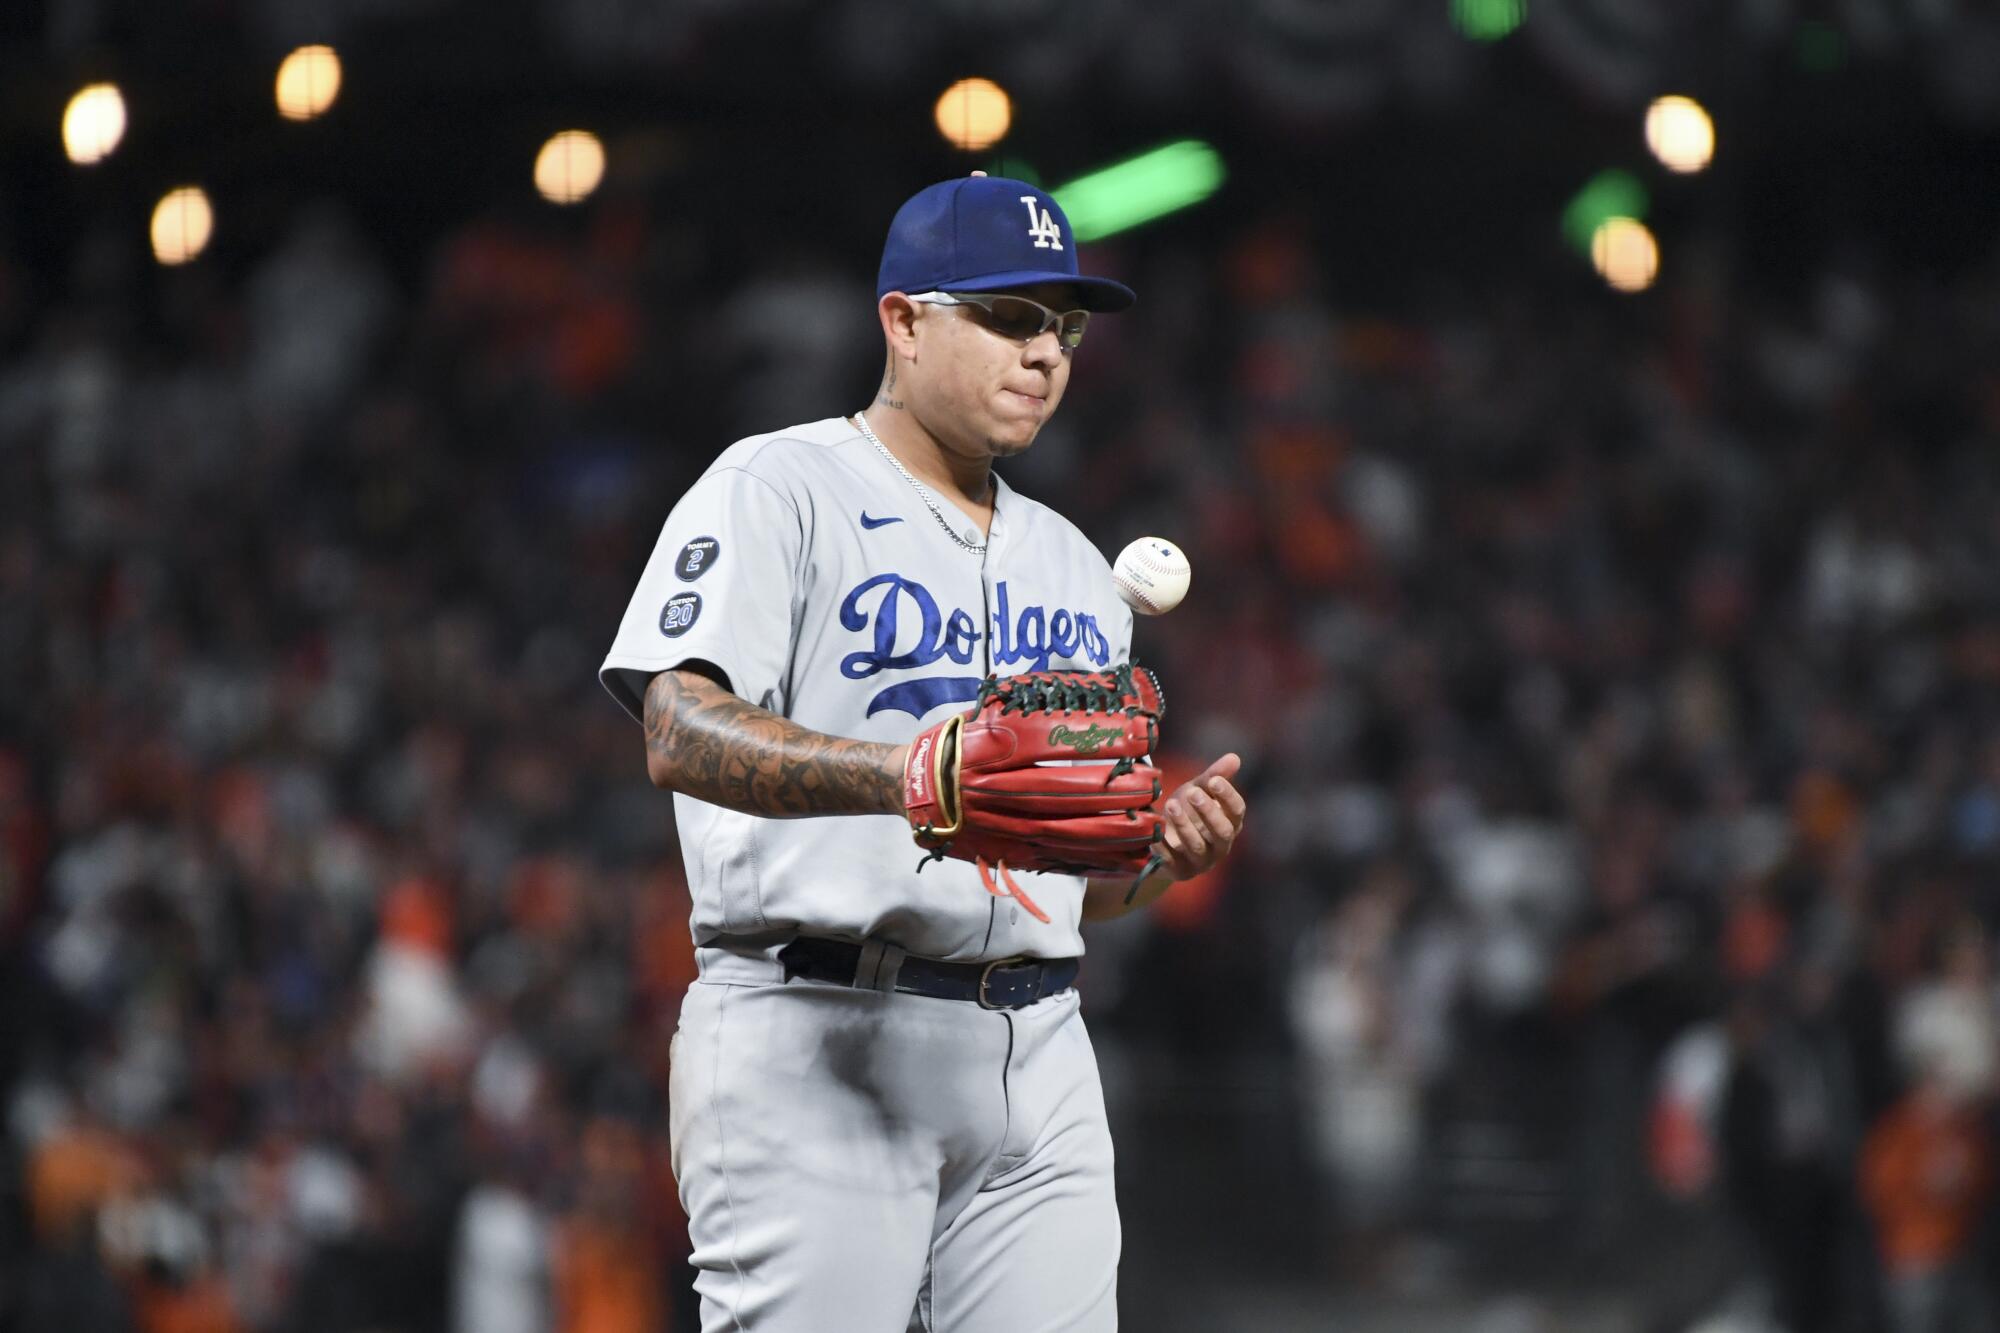 Dodgers pitcher Julio Urias tosses the ball on the mound after allowing a solo home run to Giants' Darin Ruf